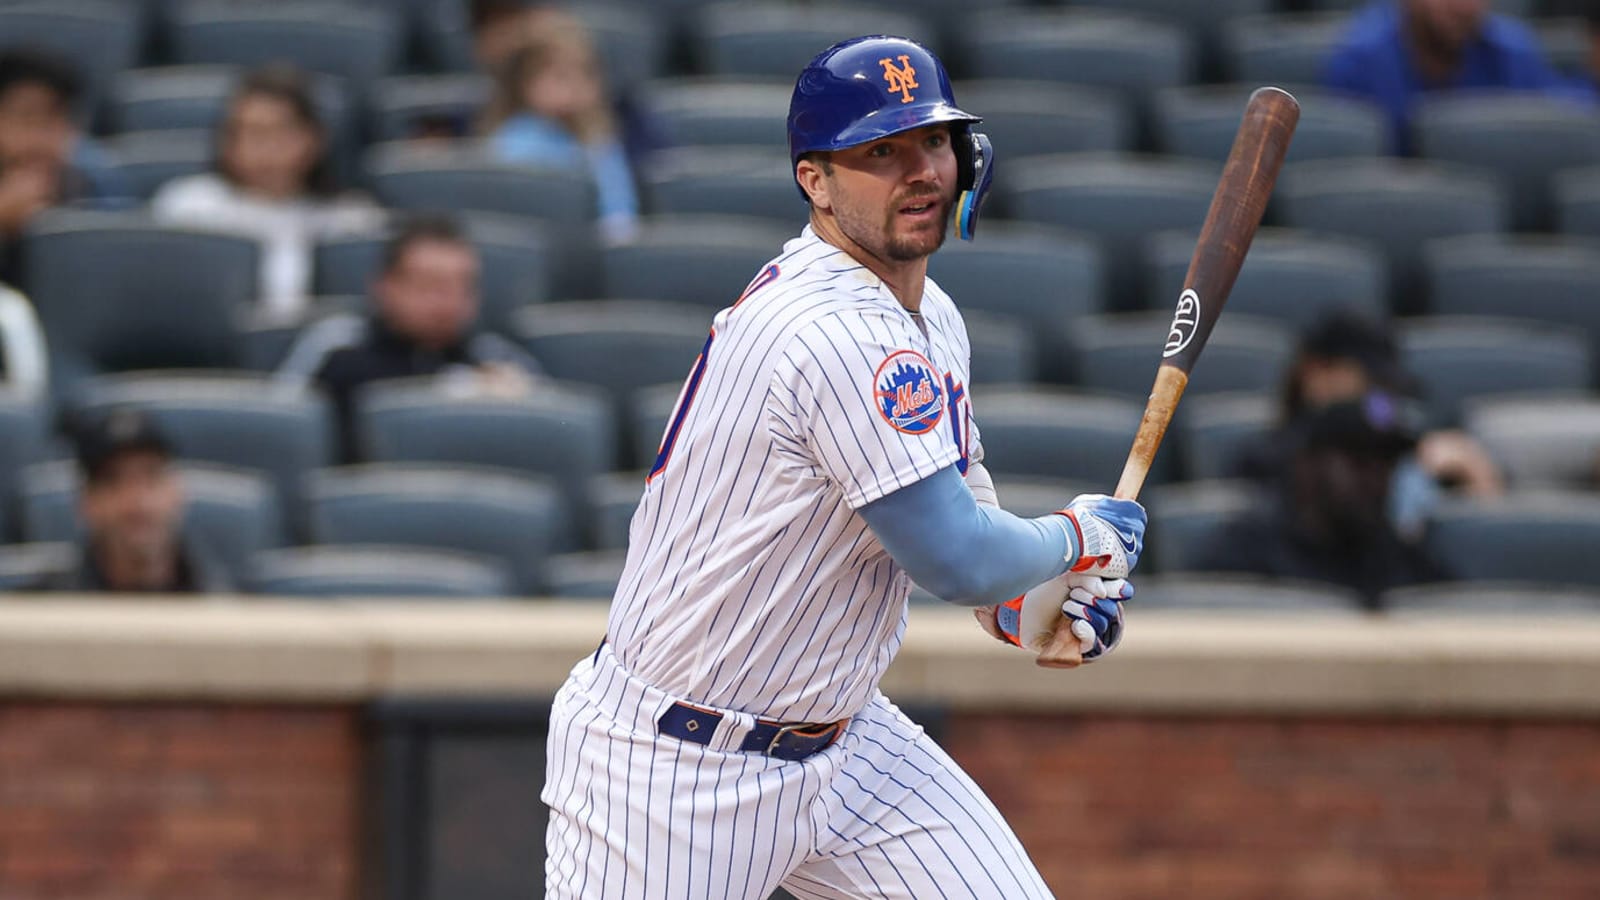 Interesting contract update on Mets' Pete Alonso emerges